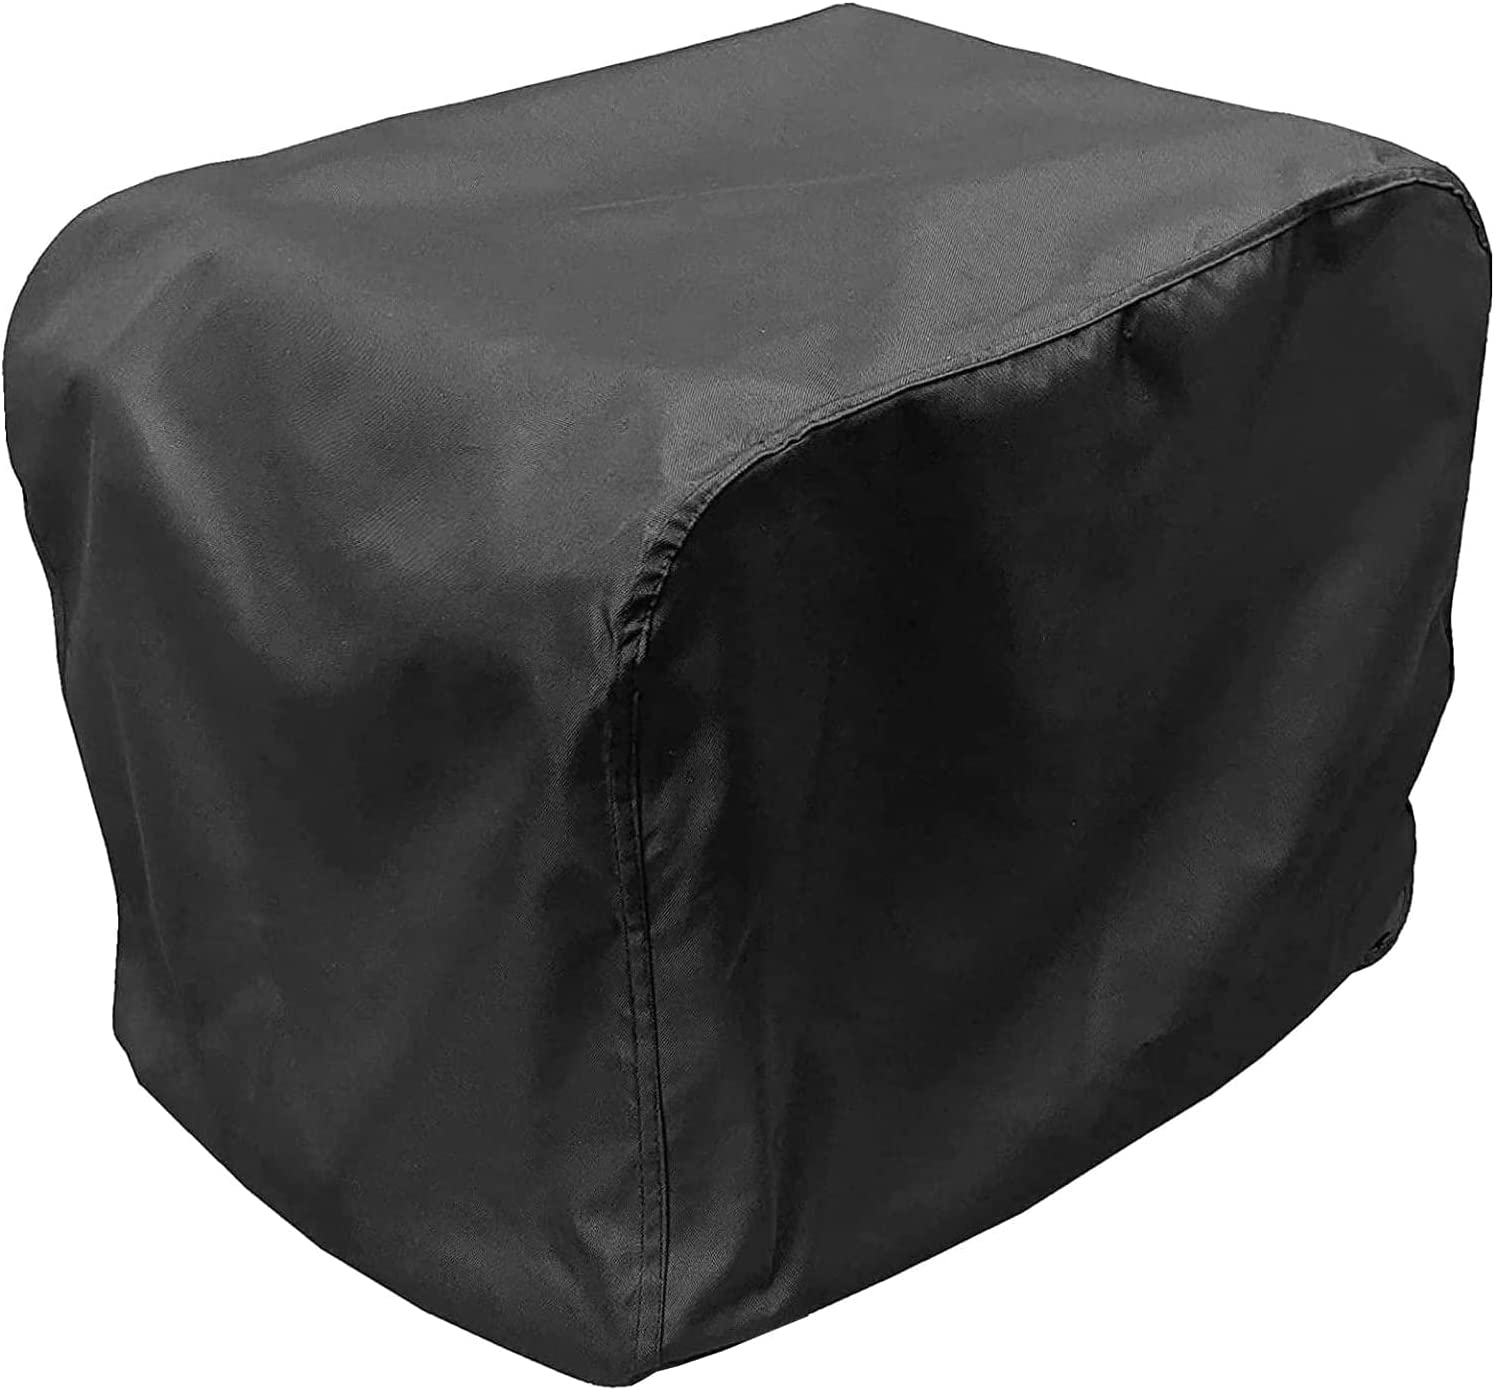 Generator Cover Waterproof, Heavy Duty Thicken 600D Polyester with Elastic Drawstring, Weather/UV Resistant Generator Cover for Universal Portable Generators 3800-6500 Watt (26”L x 20”W x20”H)